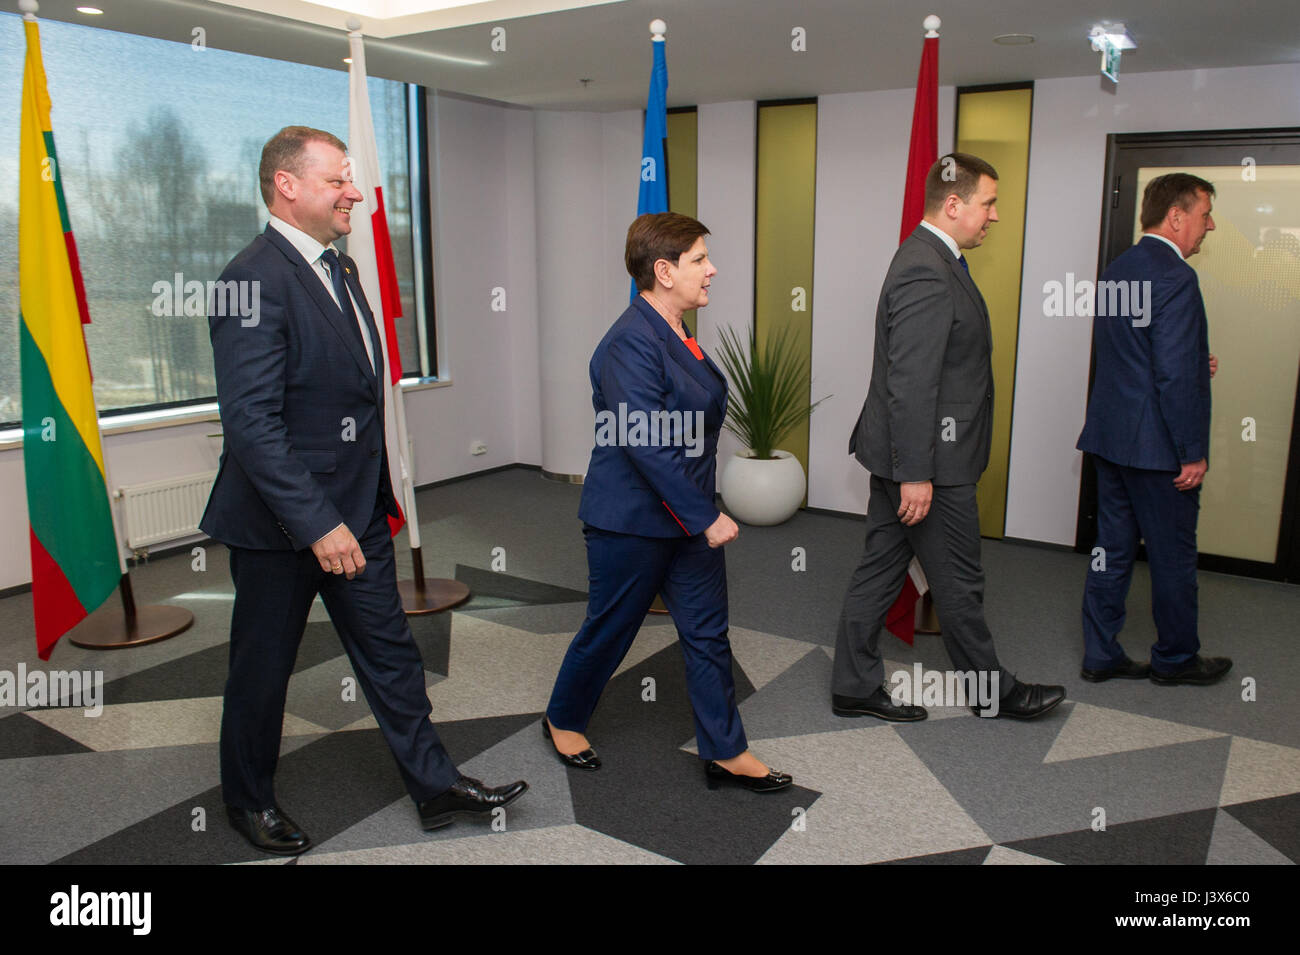 Tallinn, Estonia, 8th May 2017. Prime Minister of Estonia Juri Ratas (2nd R), Prime Minister of Latvia Maris Kucinskis (R), Prime Minister of Lithuania Saulius Skvernelis (L) and Prime Minister of Poland Beata Szydlo(2nd L) leave a family photo prior their meeting in Tallinn. The topics of the meeting were regional security, energy community, transport connections and the future of the European Union. Credit: Nicolas Bouvy/Alamy Live News Stock Photo